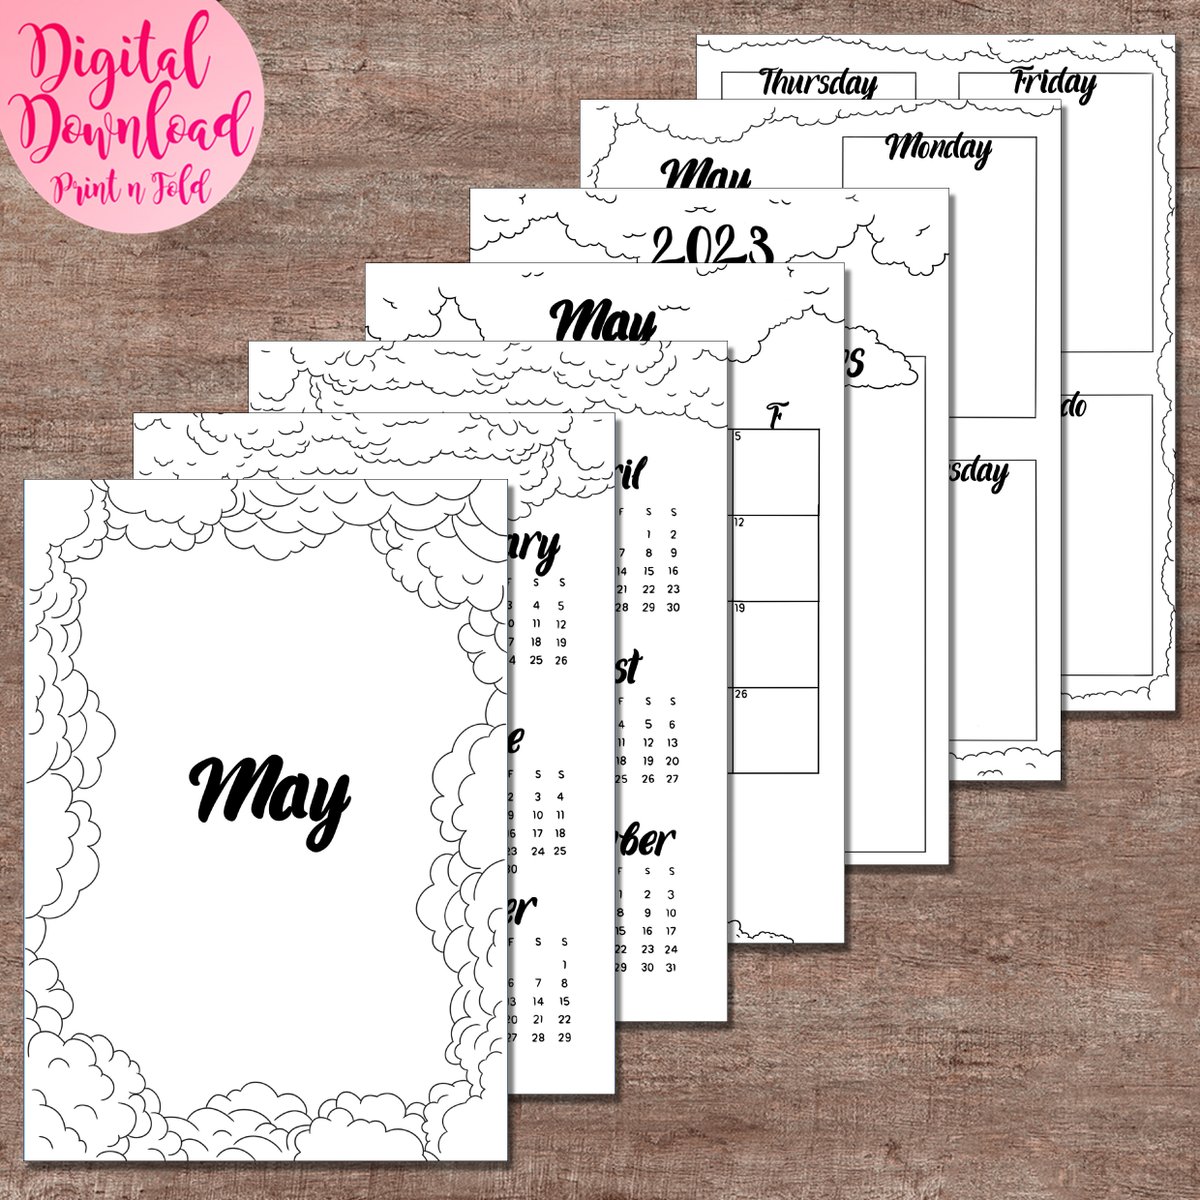 May is only a few days away

For a limited time there is 20% off

etsy.me/3AA6wVO 

#monthlypages #plannerpages #clouds #daydreaming #trackers #logs #printable #easy #DIY #sale #discount